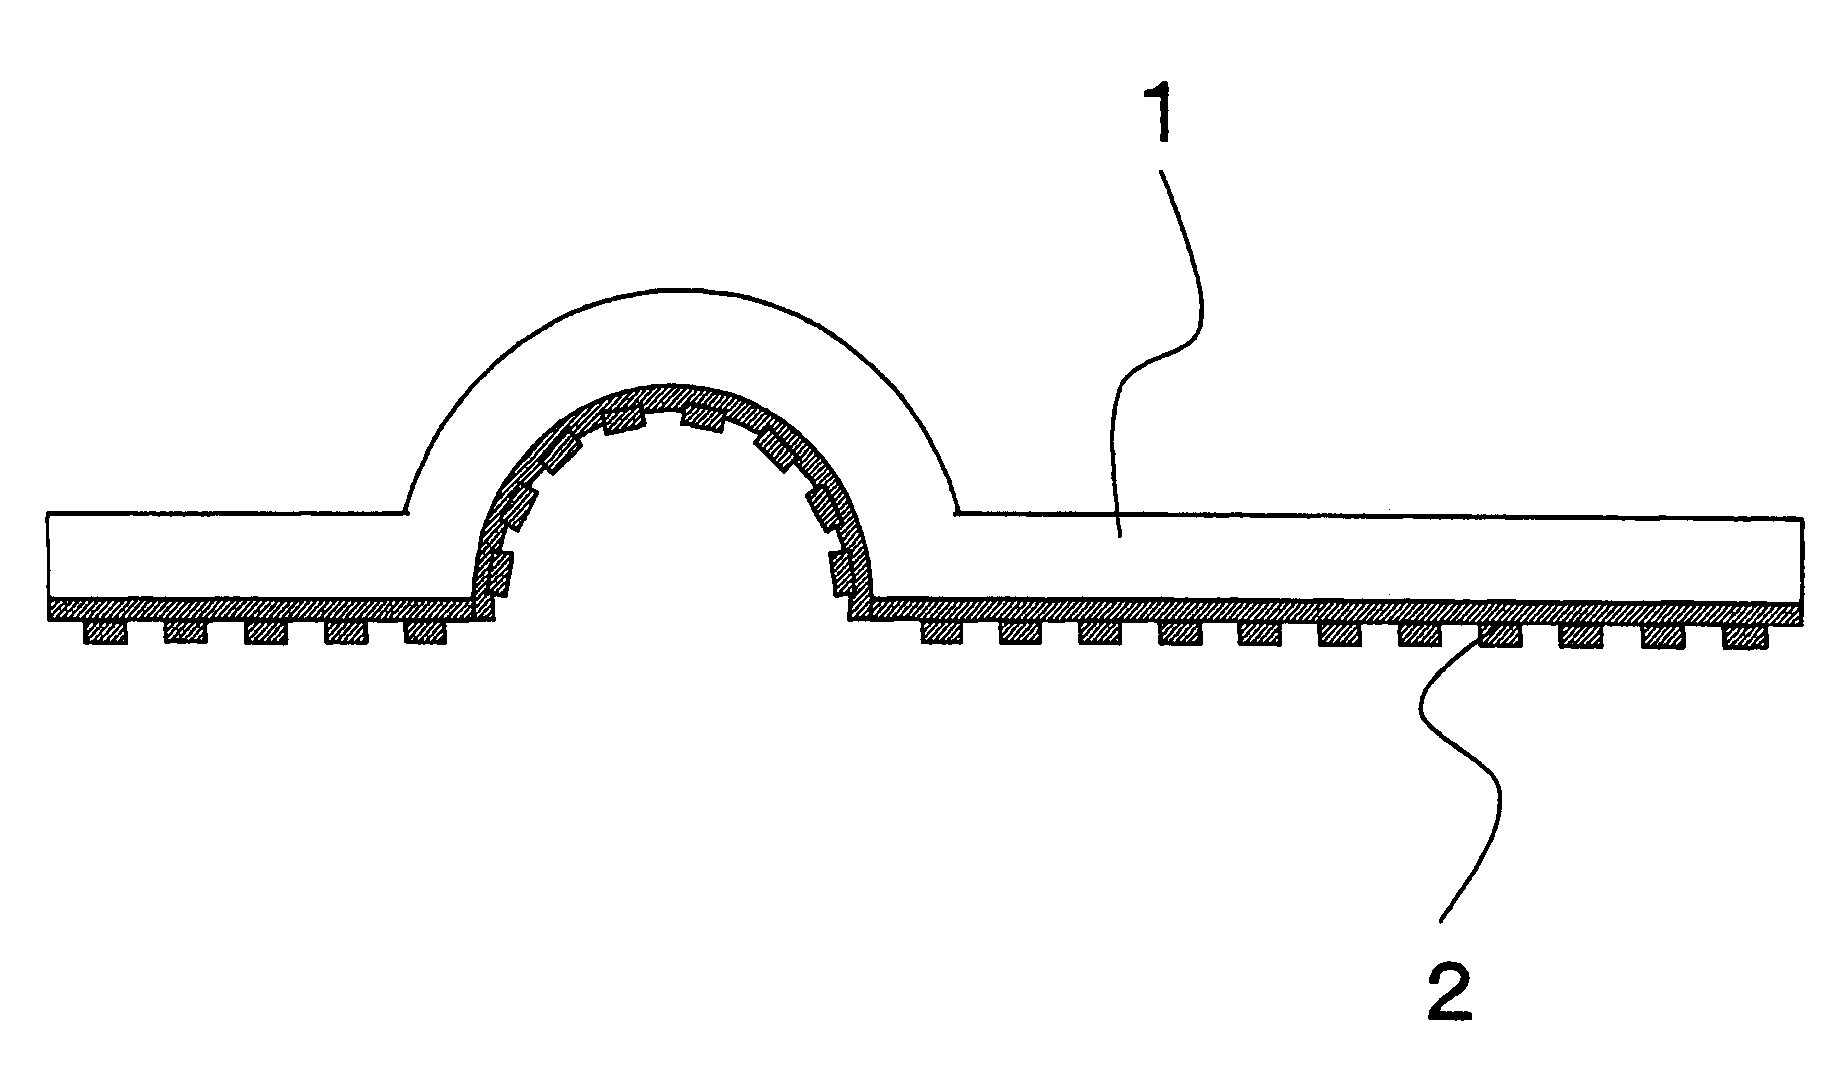 Semiconductor device including a coupling conductor having a concave and convex